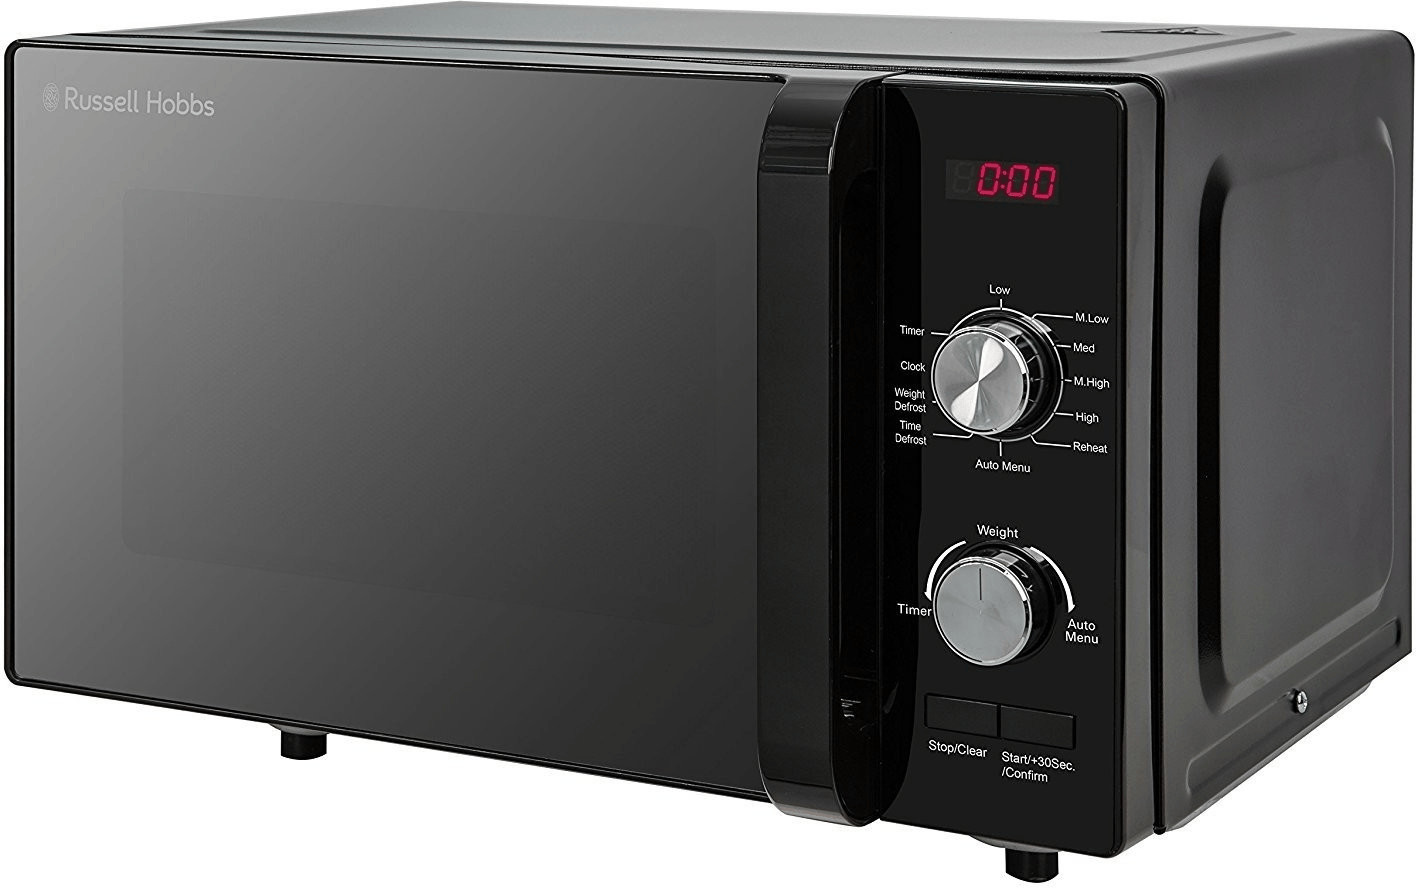 Buy Russell Hobbs RHFM2001 Microwave from £87.97 (Today) – Best Deals